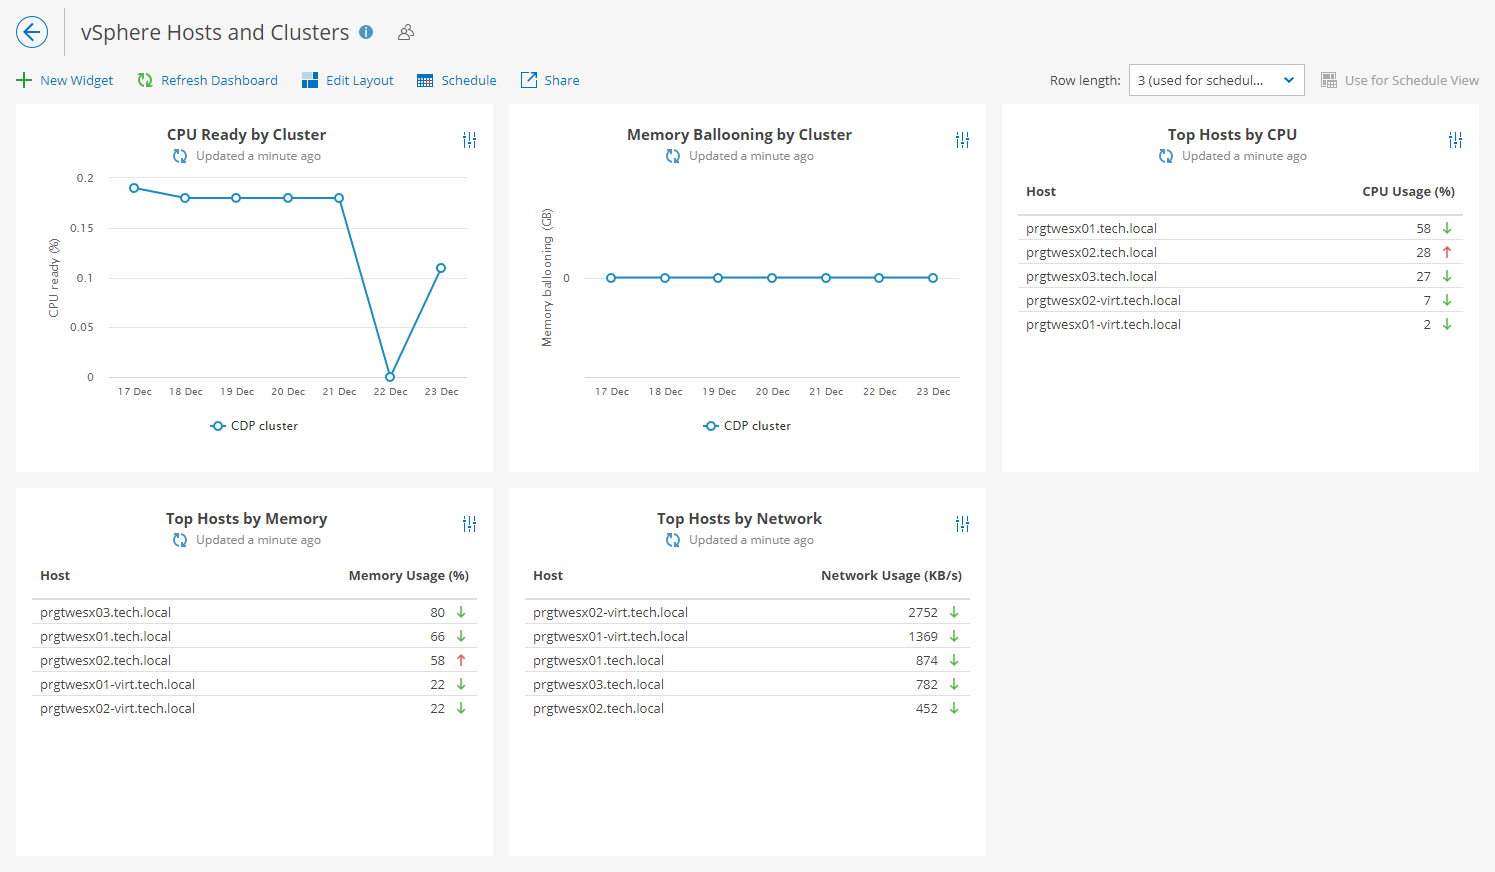 vSphere Hosts and Clusters Dashboard